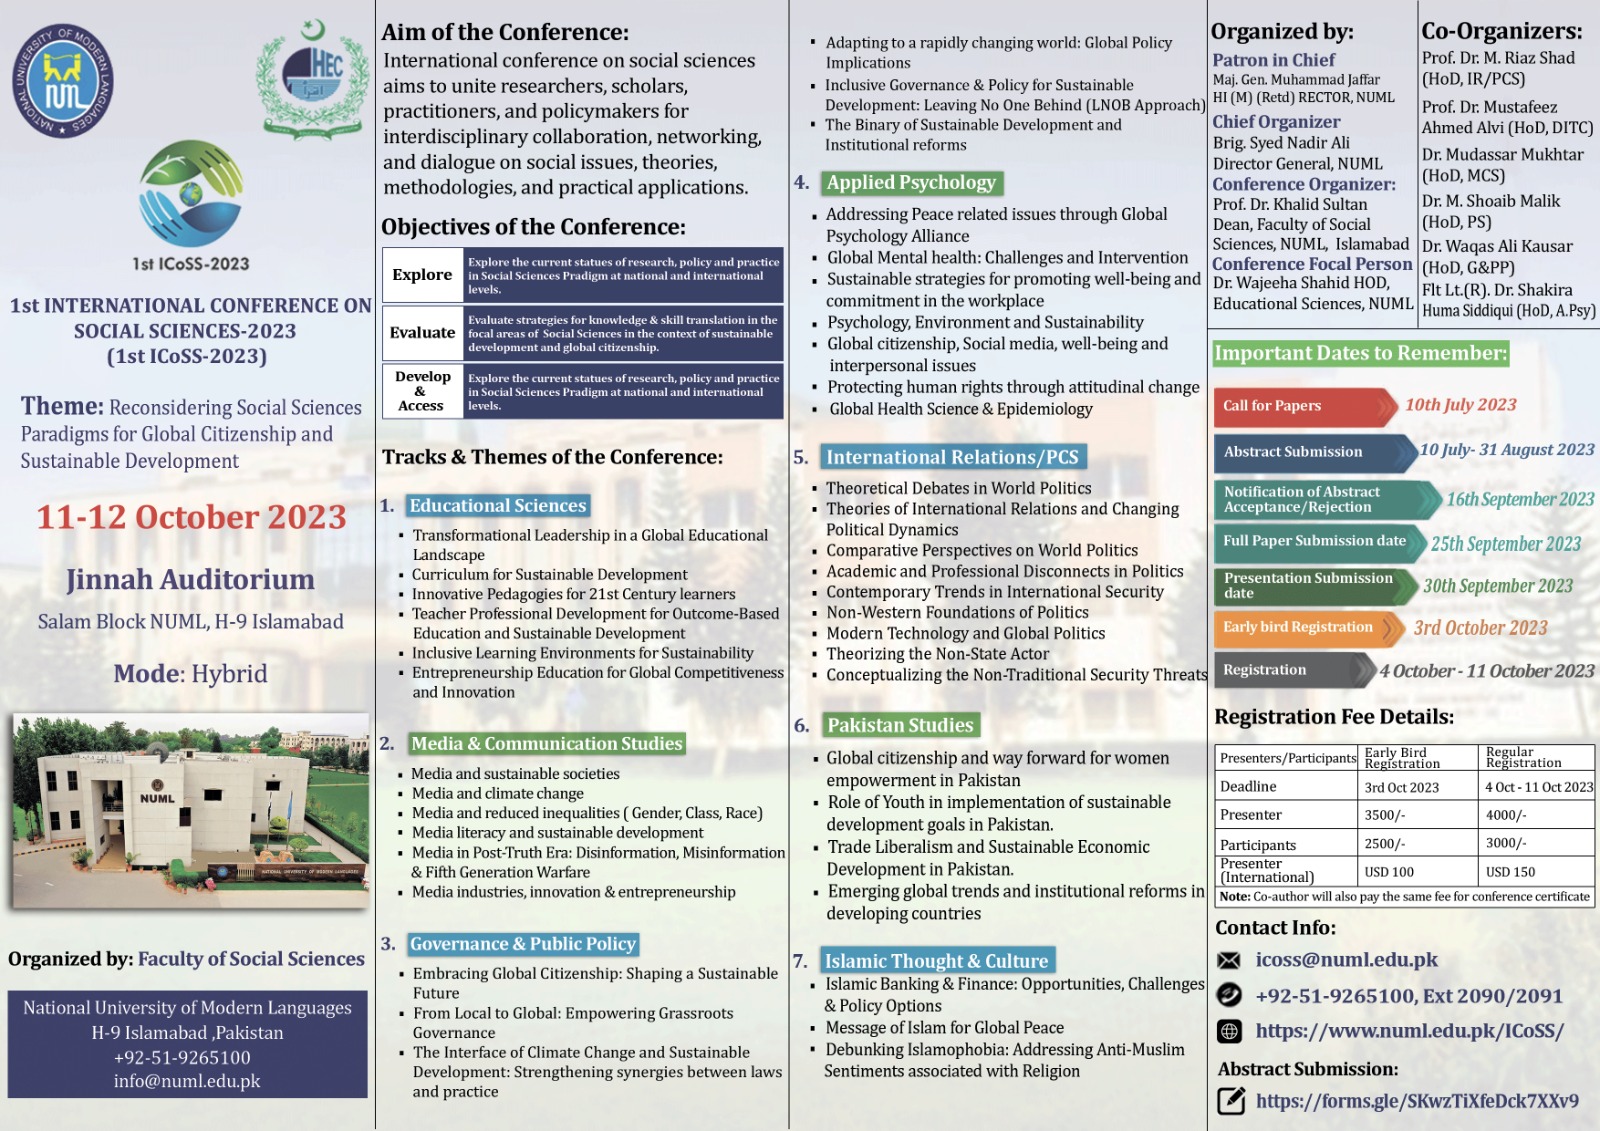 1ST INTERNATIONAL CONFERENCE ON SOCIAL SCIENCES-2023  (1st ICoSS-2023)